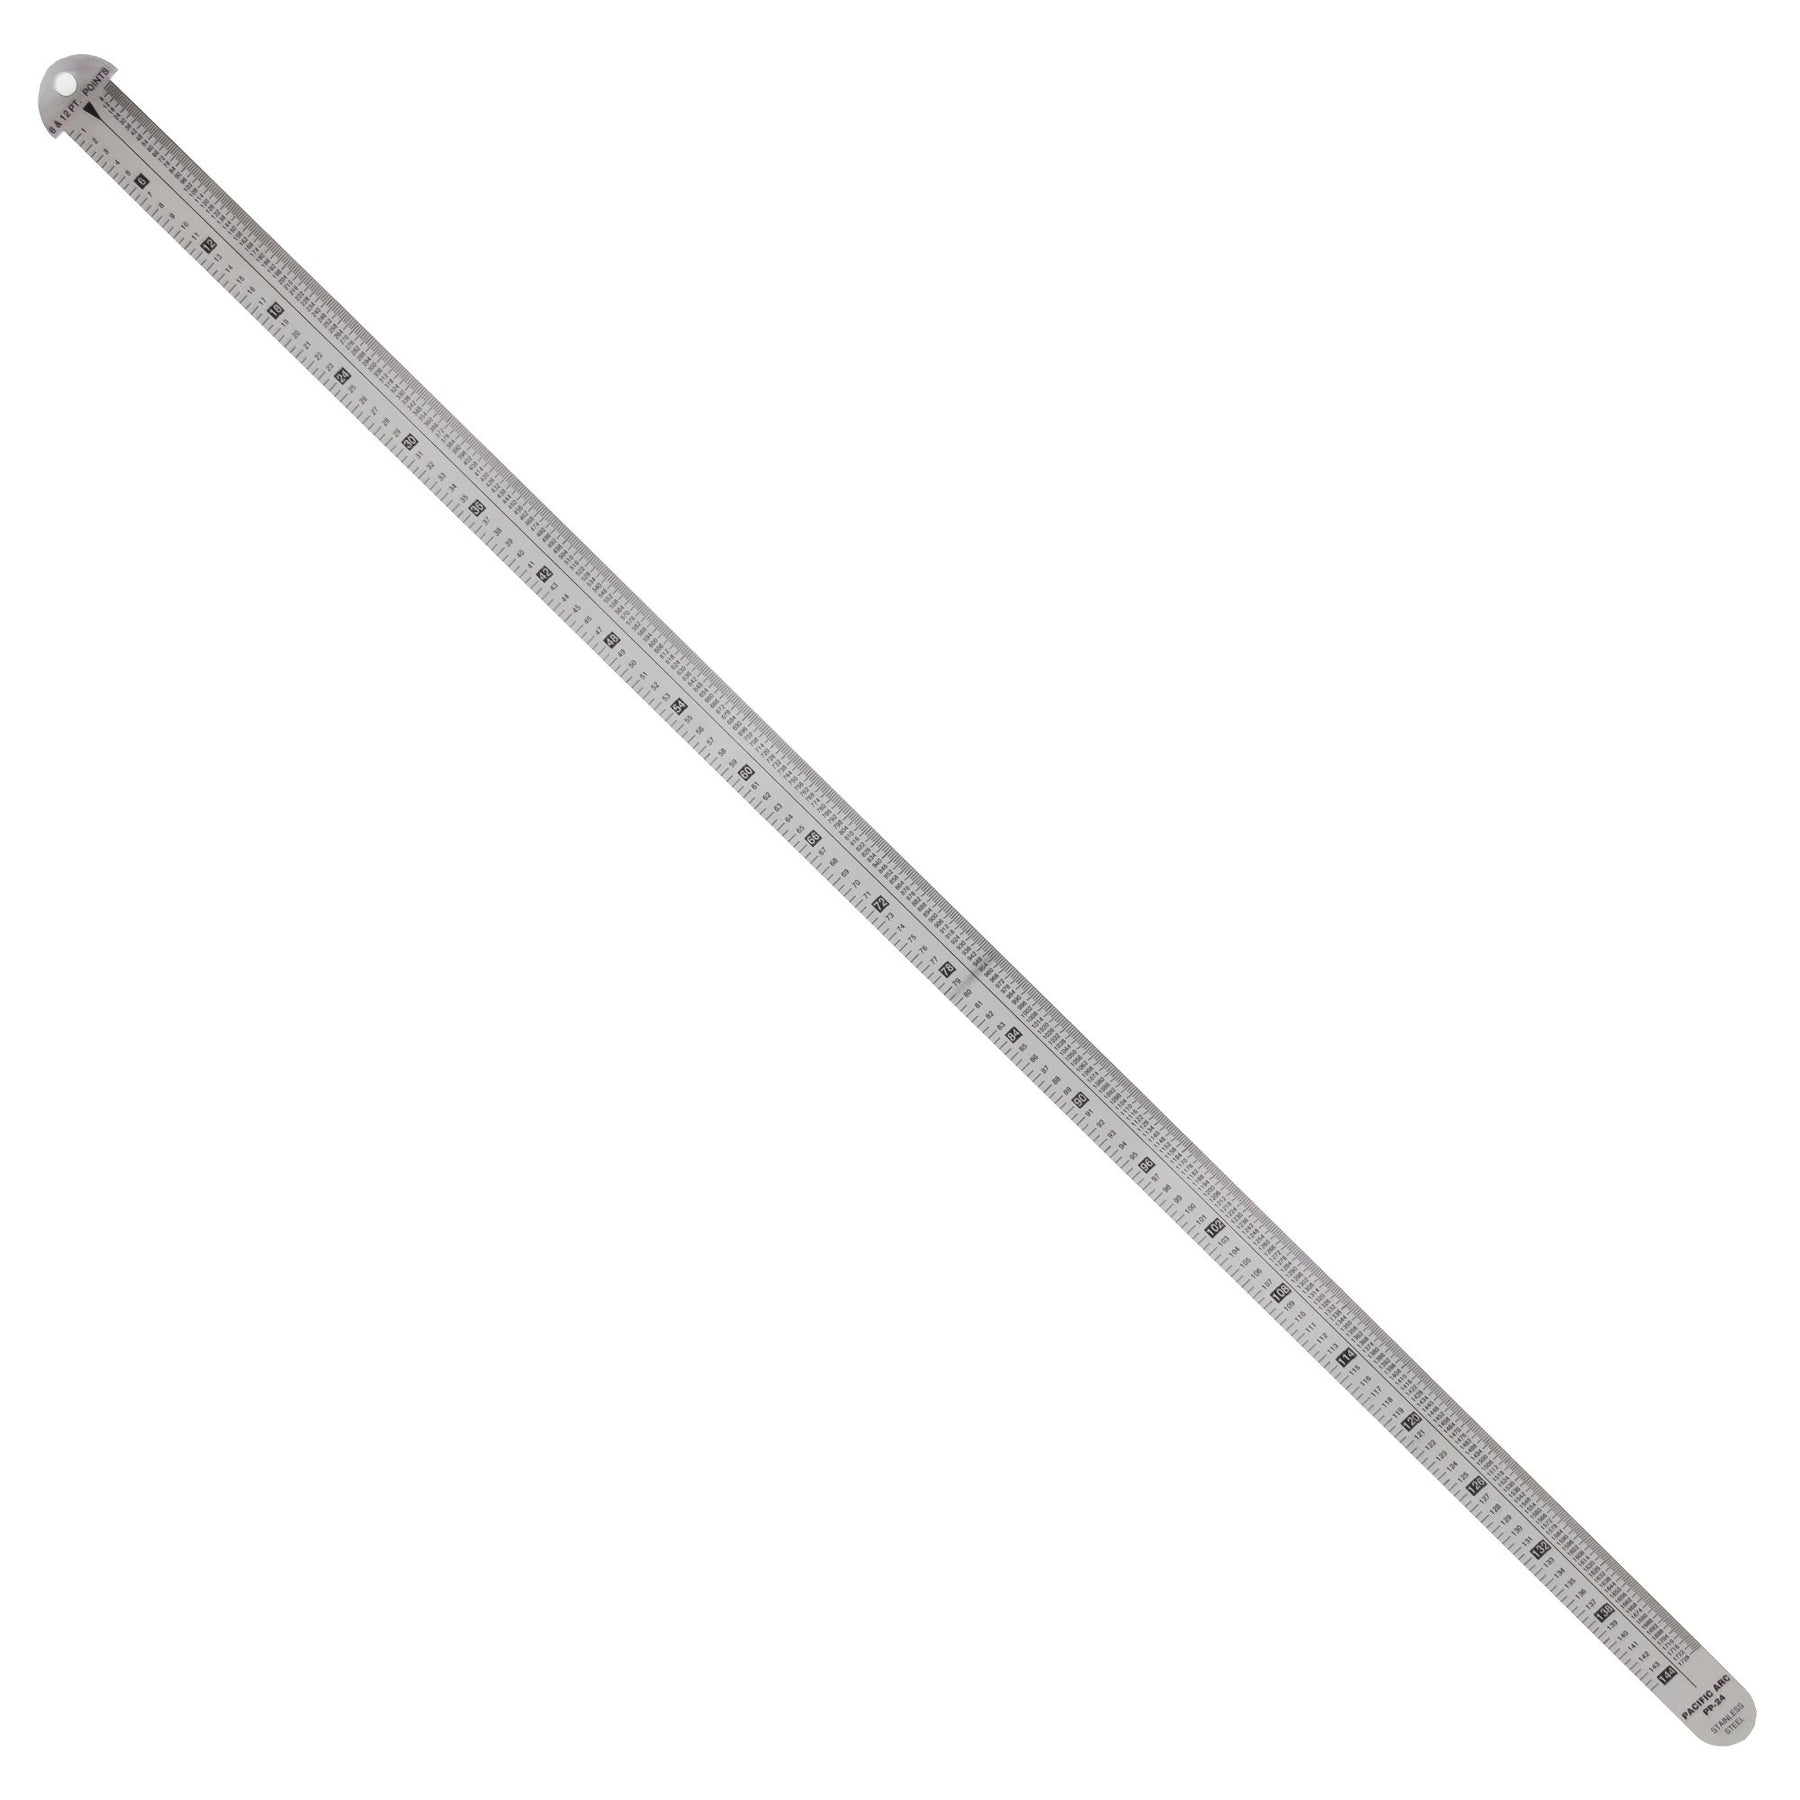 Printer's Line Gauge/Stainless Steel/Points, Inches, Agates/18 L